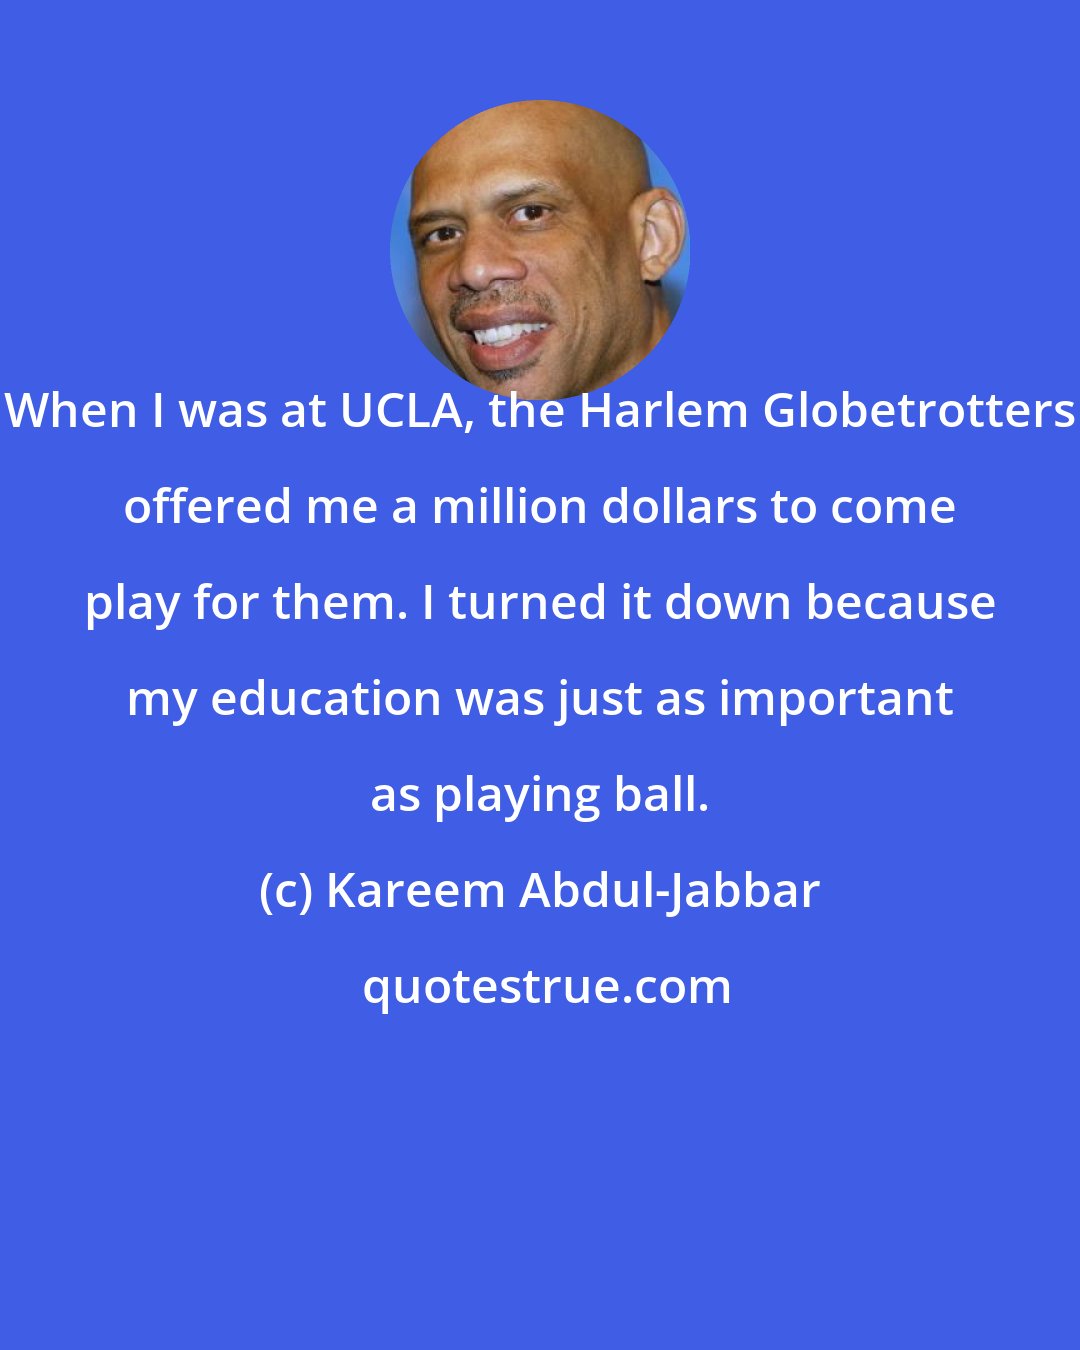 Kareem Abdul-Jabbar: When I was at UCLA, the Harlem Globetrotters offered me a million dollars to come play for them. I turned it down because my education was just as important as playing ball.